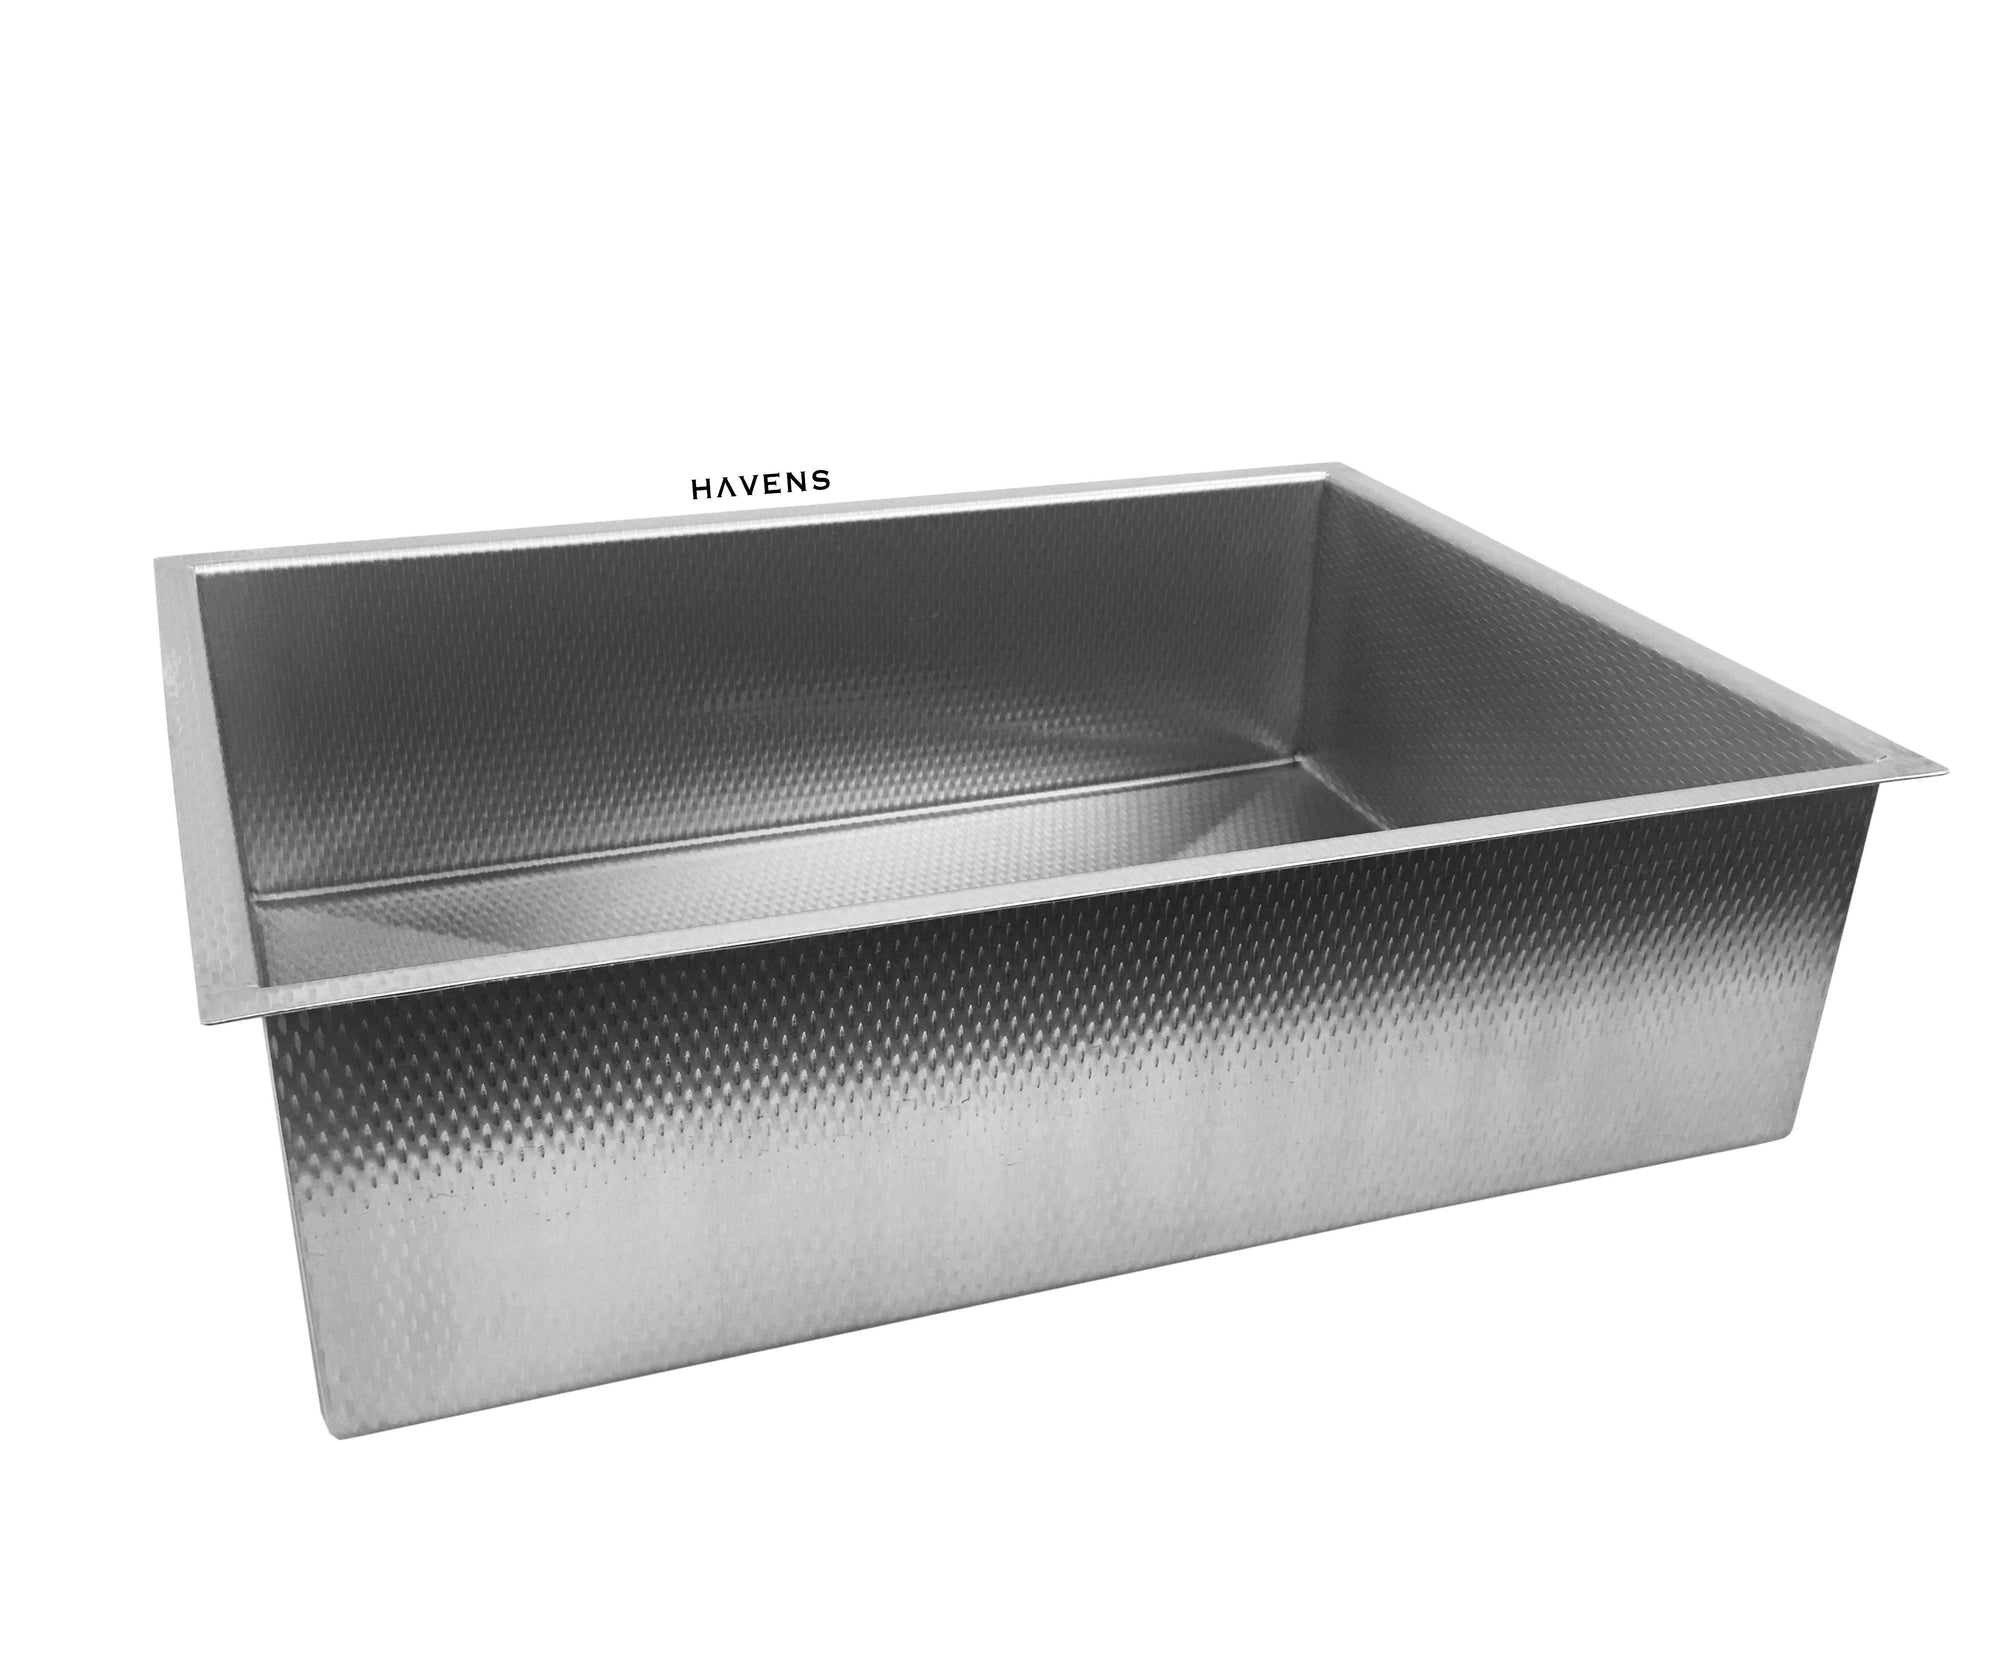 Accessory - Stainless Steel Sink Drop-In Bowl